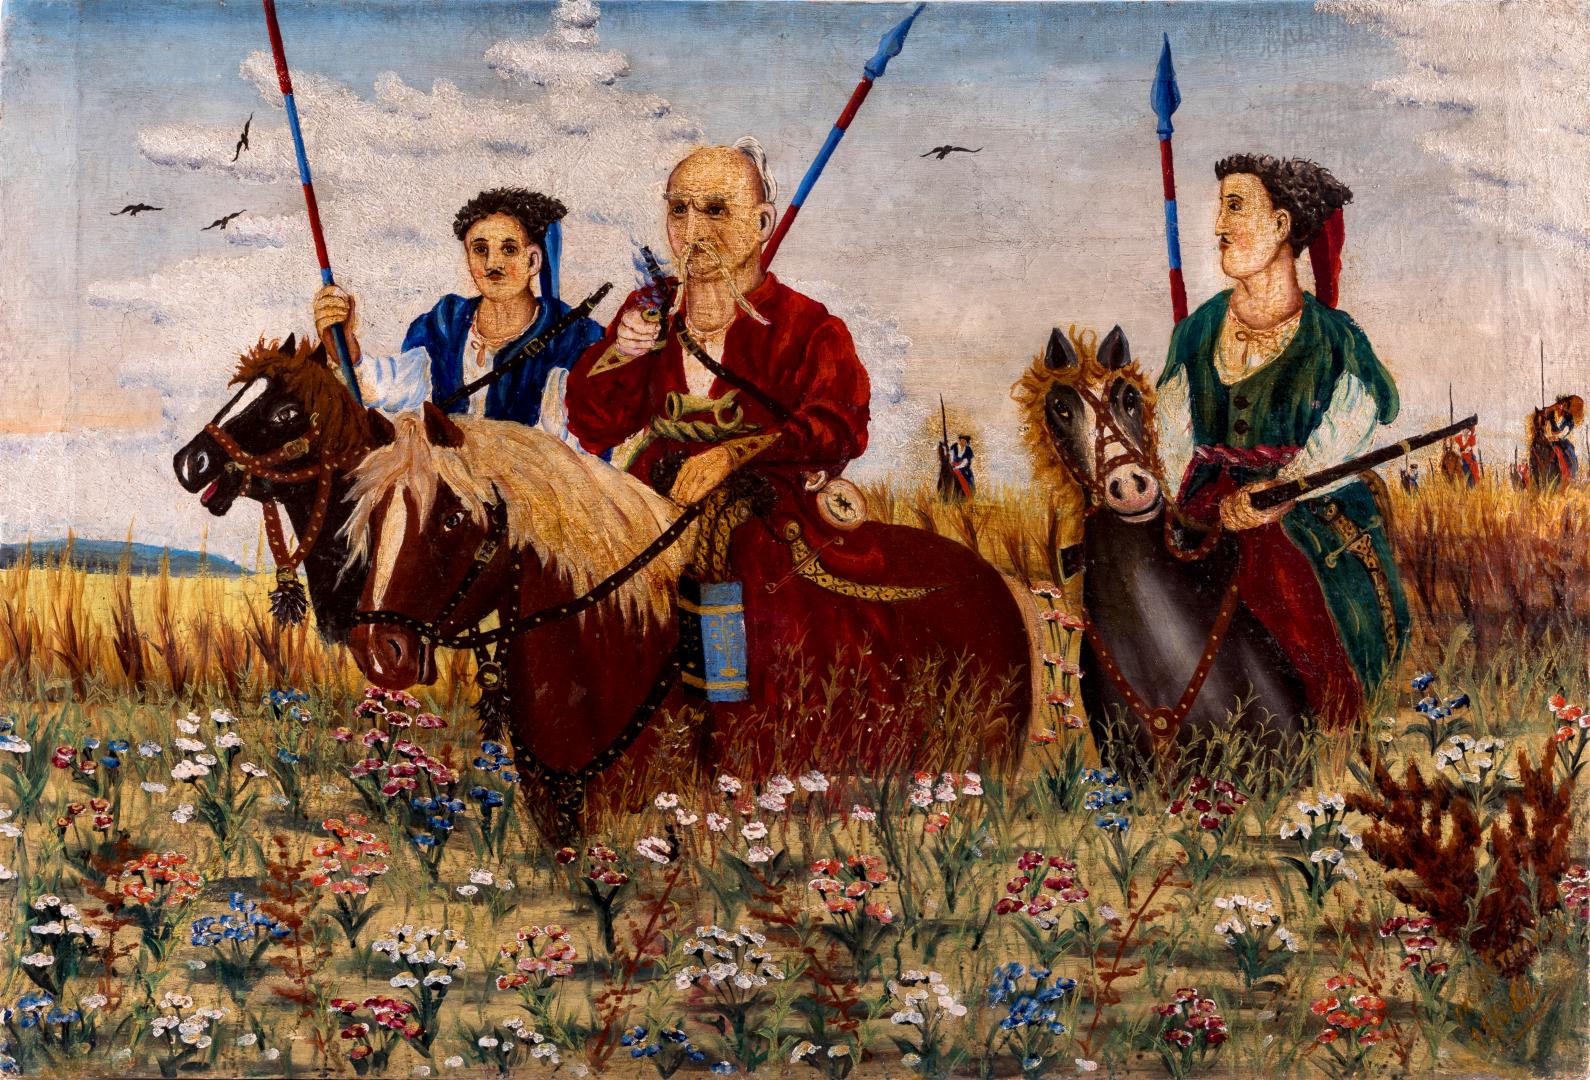 Taras Bulba with his sons in the steppe